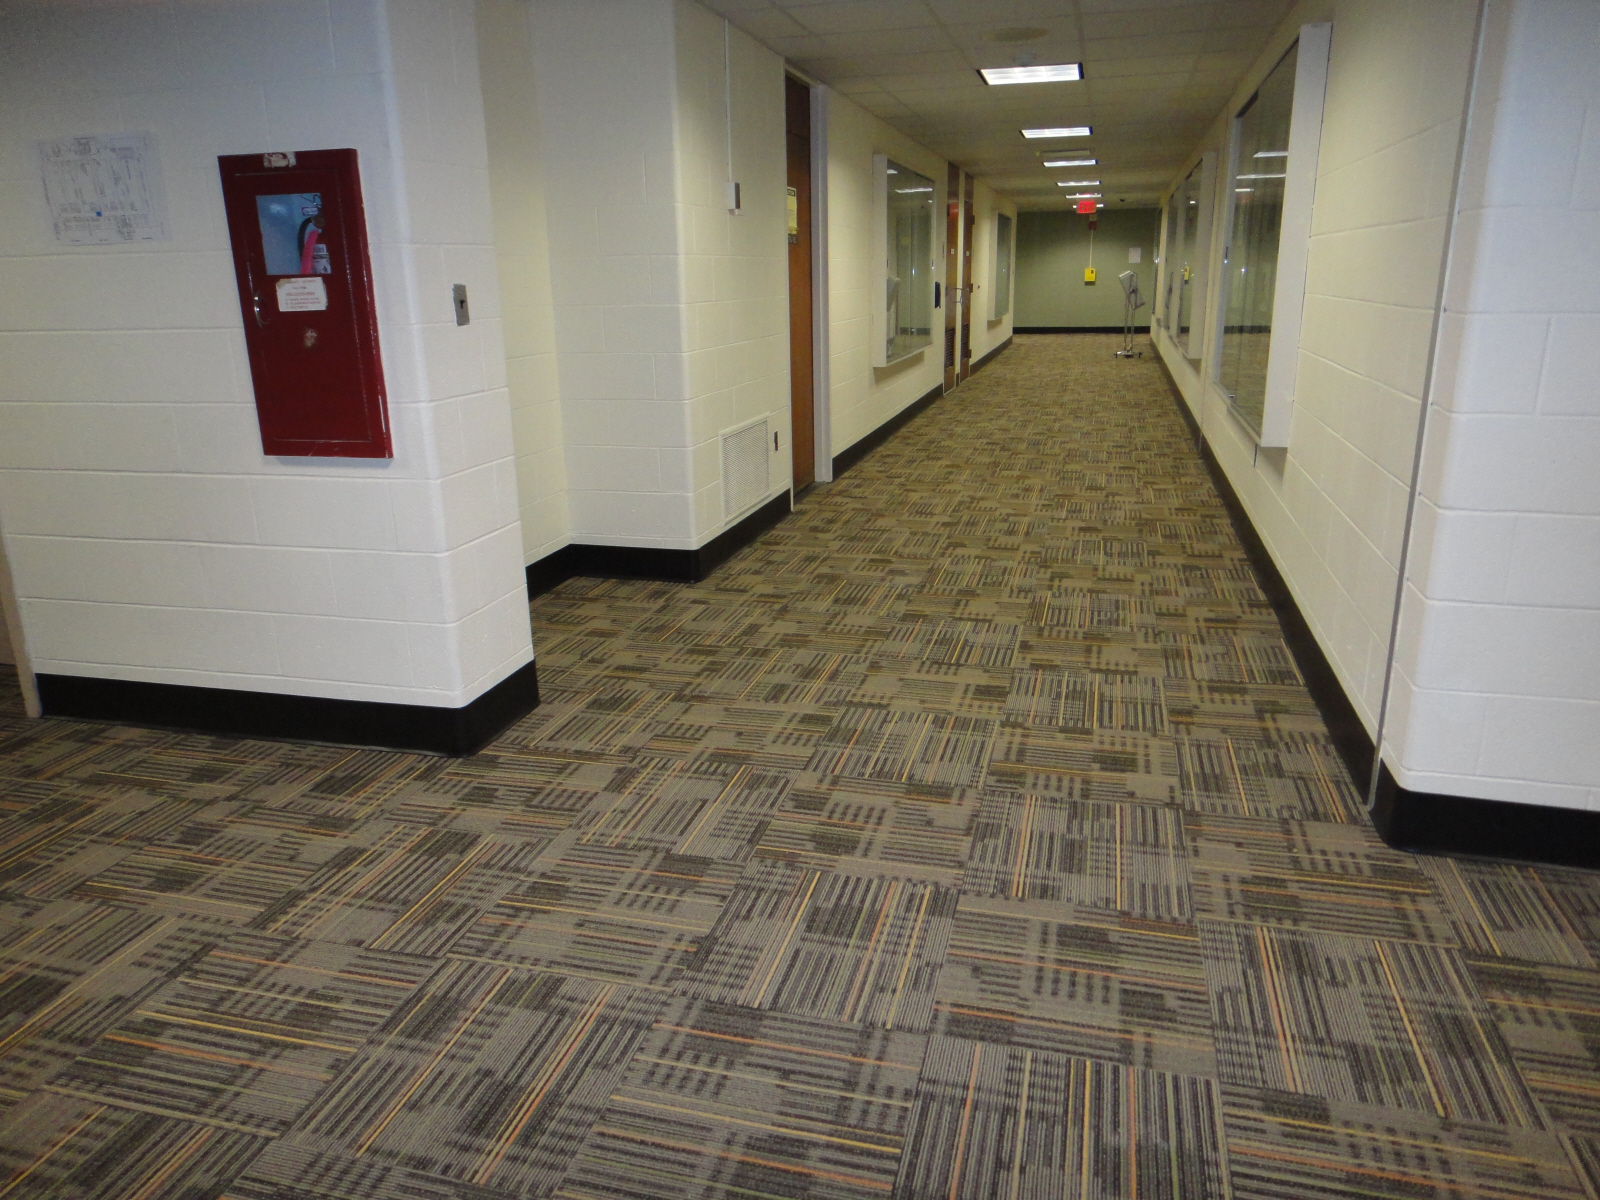 Photo Gallery Commercial Flooring Photos Quality Flooring Images Finish Line Flooring Services